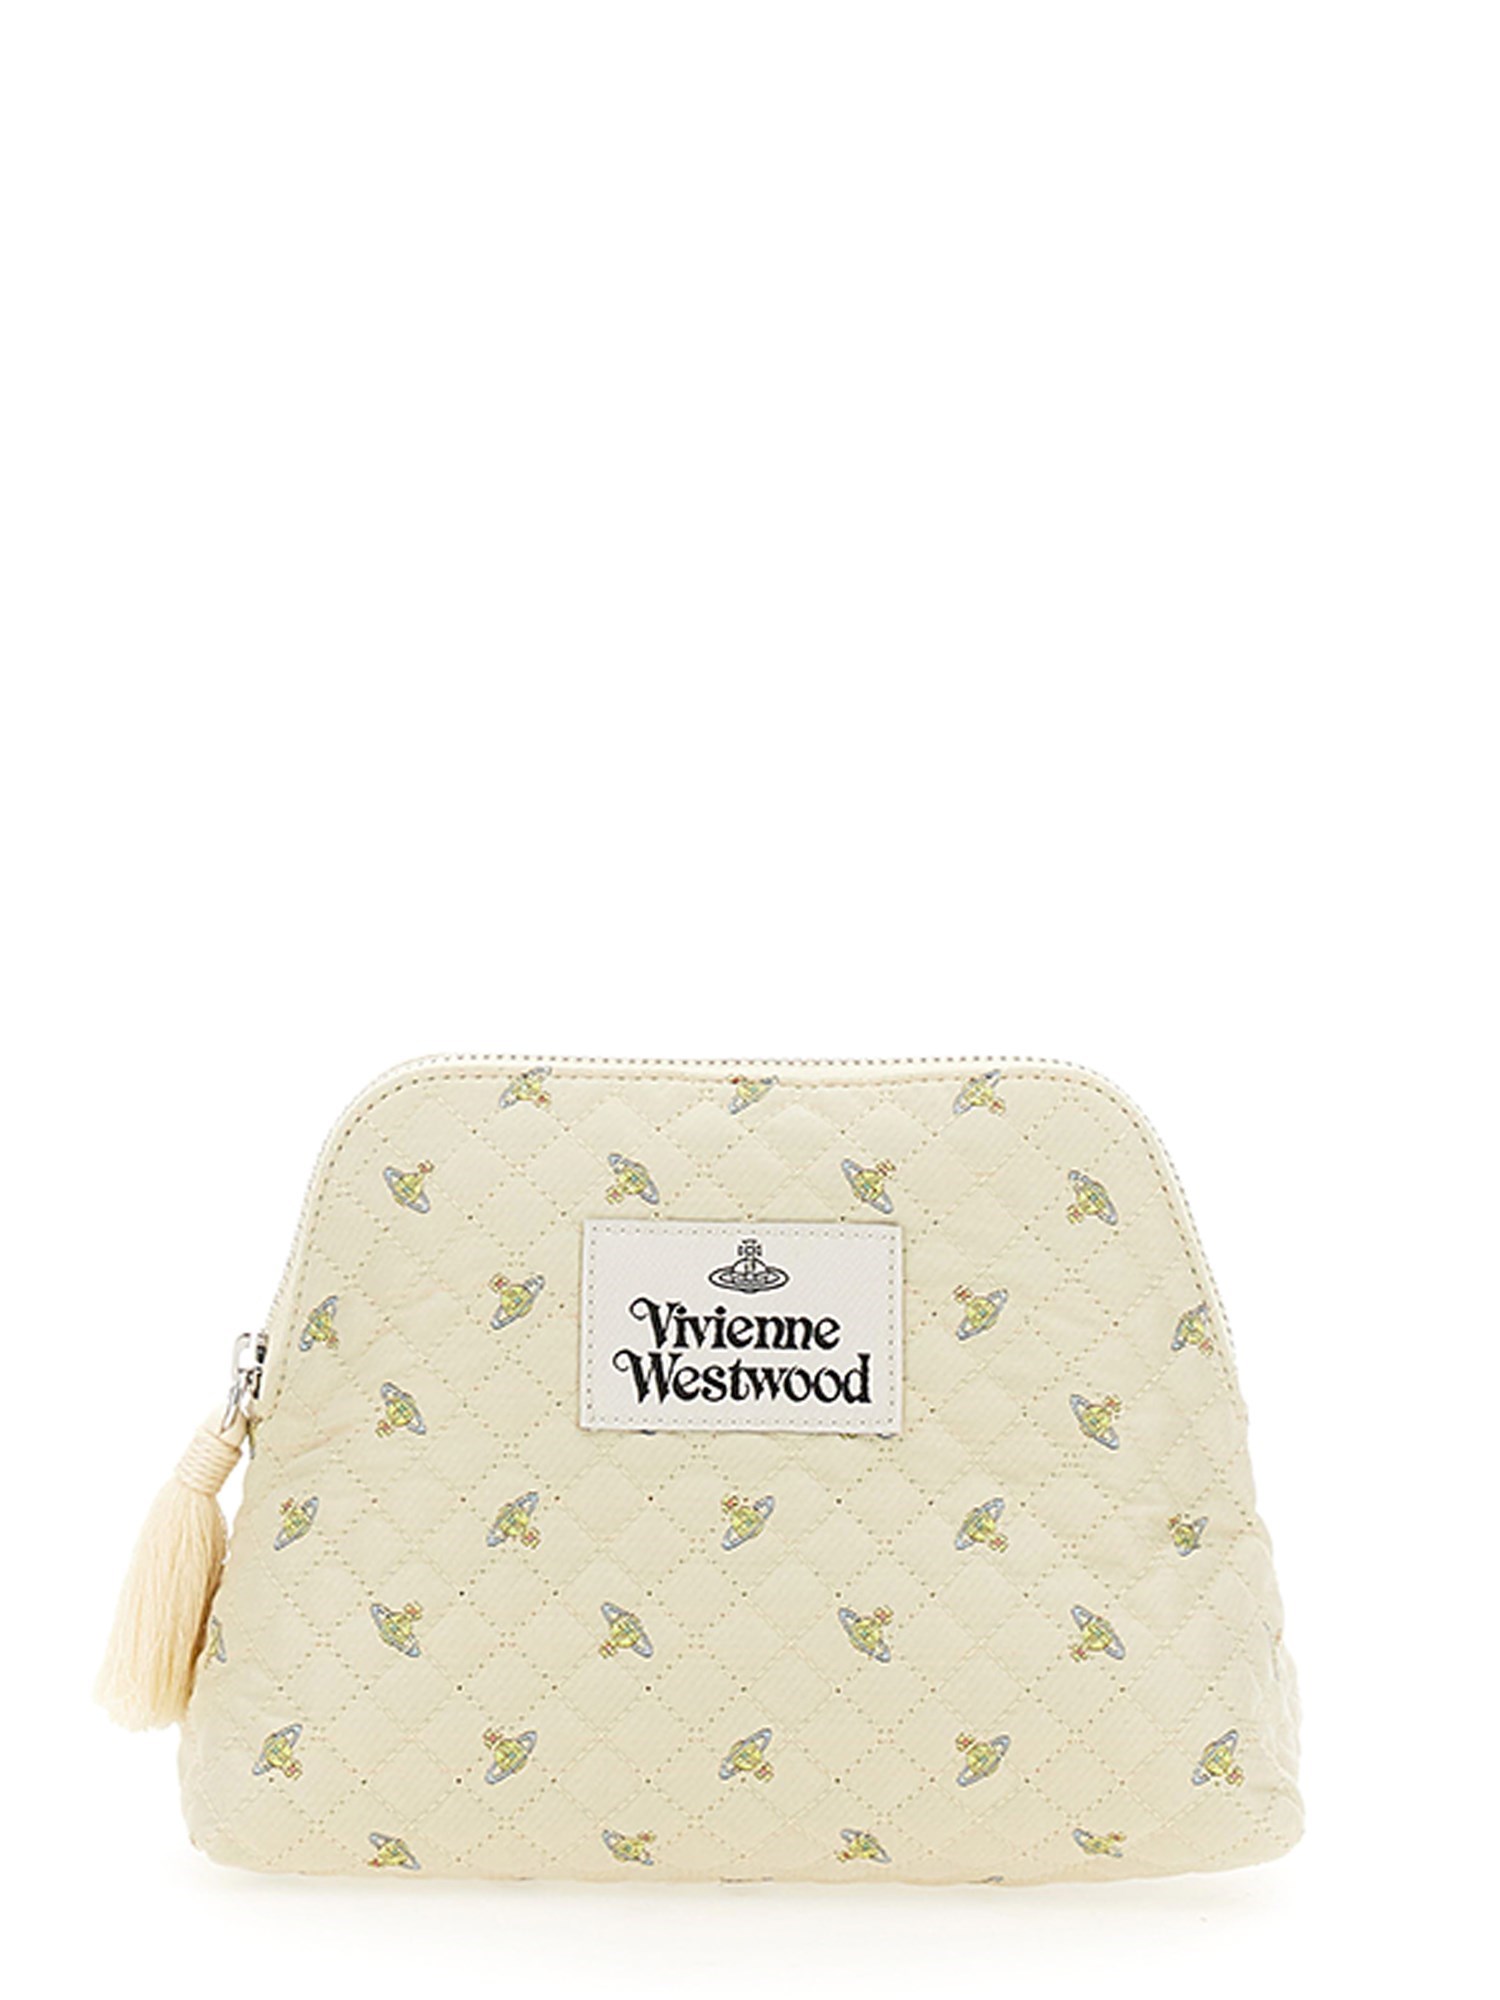 Vivienne Westwood New Bettina beige x gold bag with bear · About Glamour ·  Online Store Powered by Storenvy